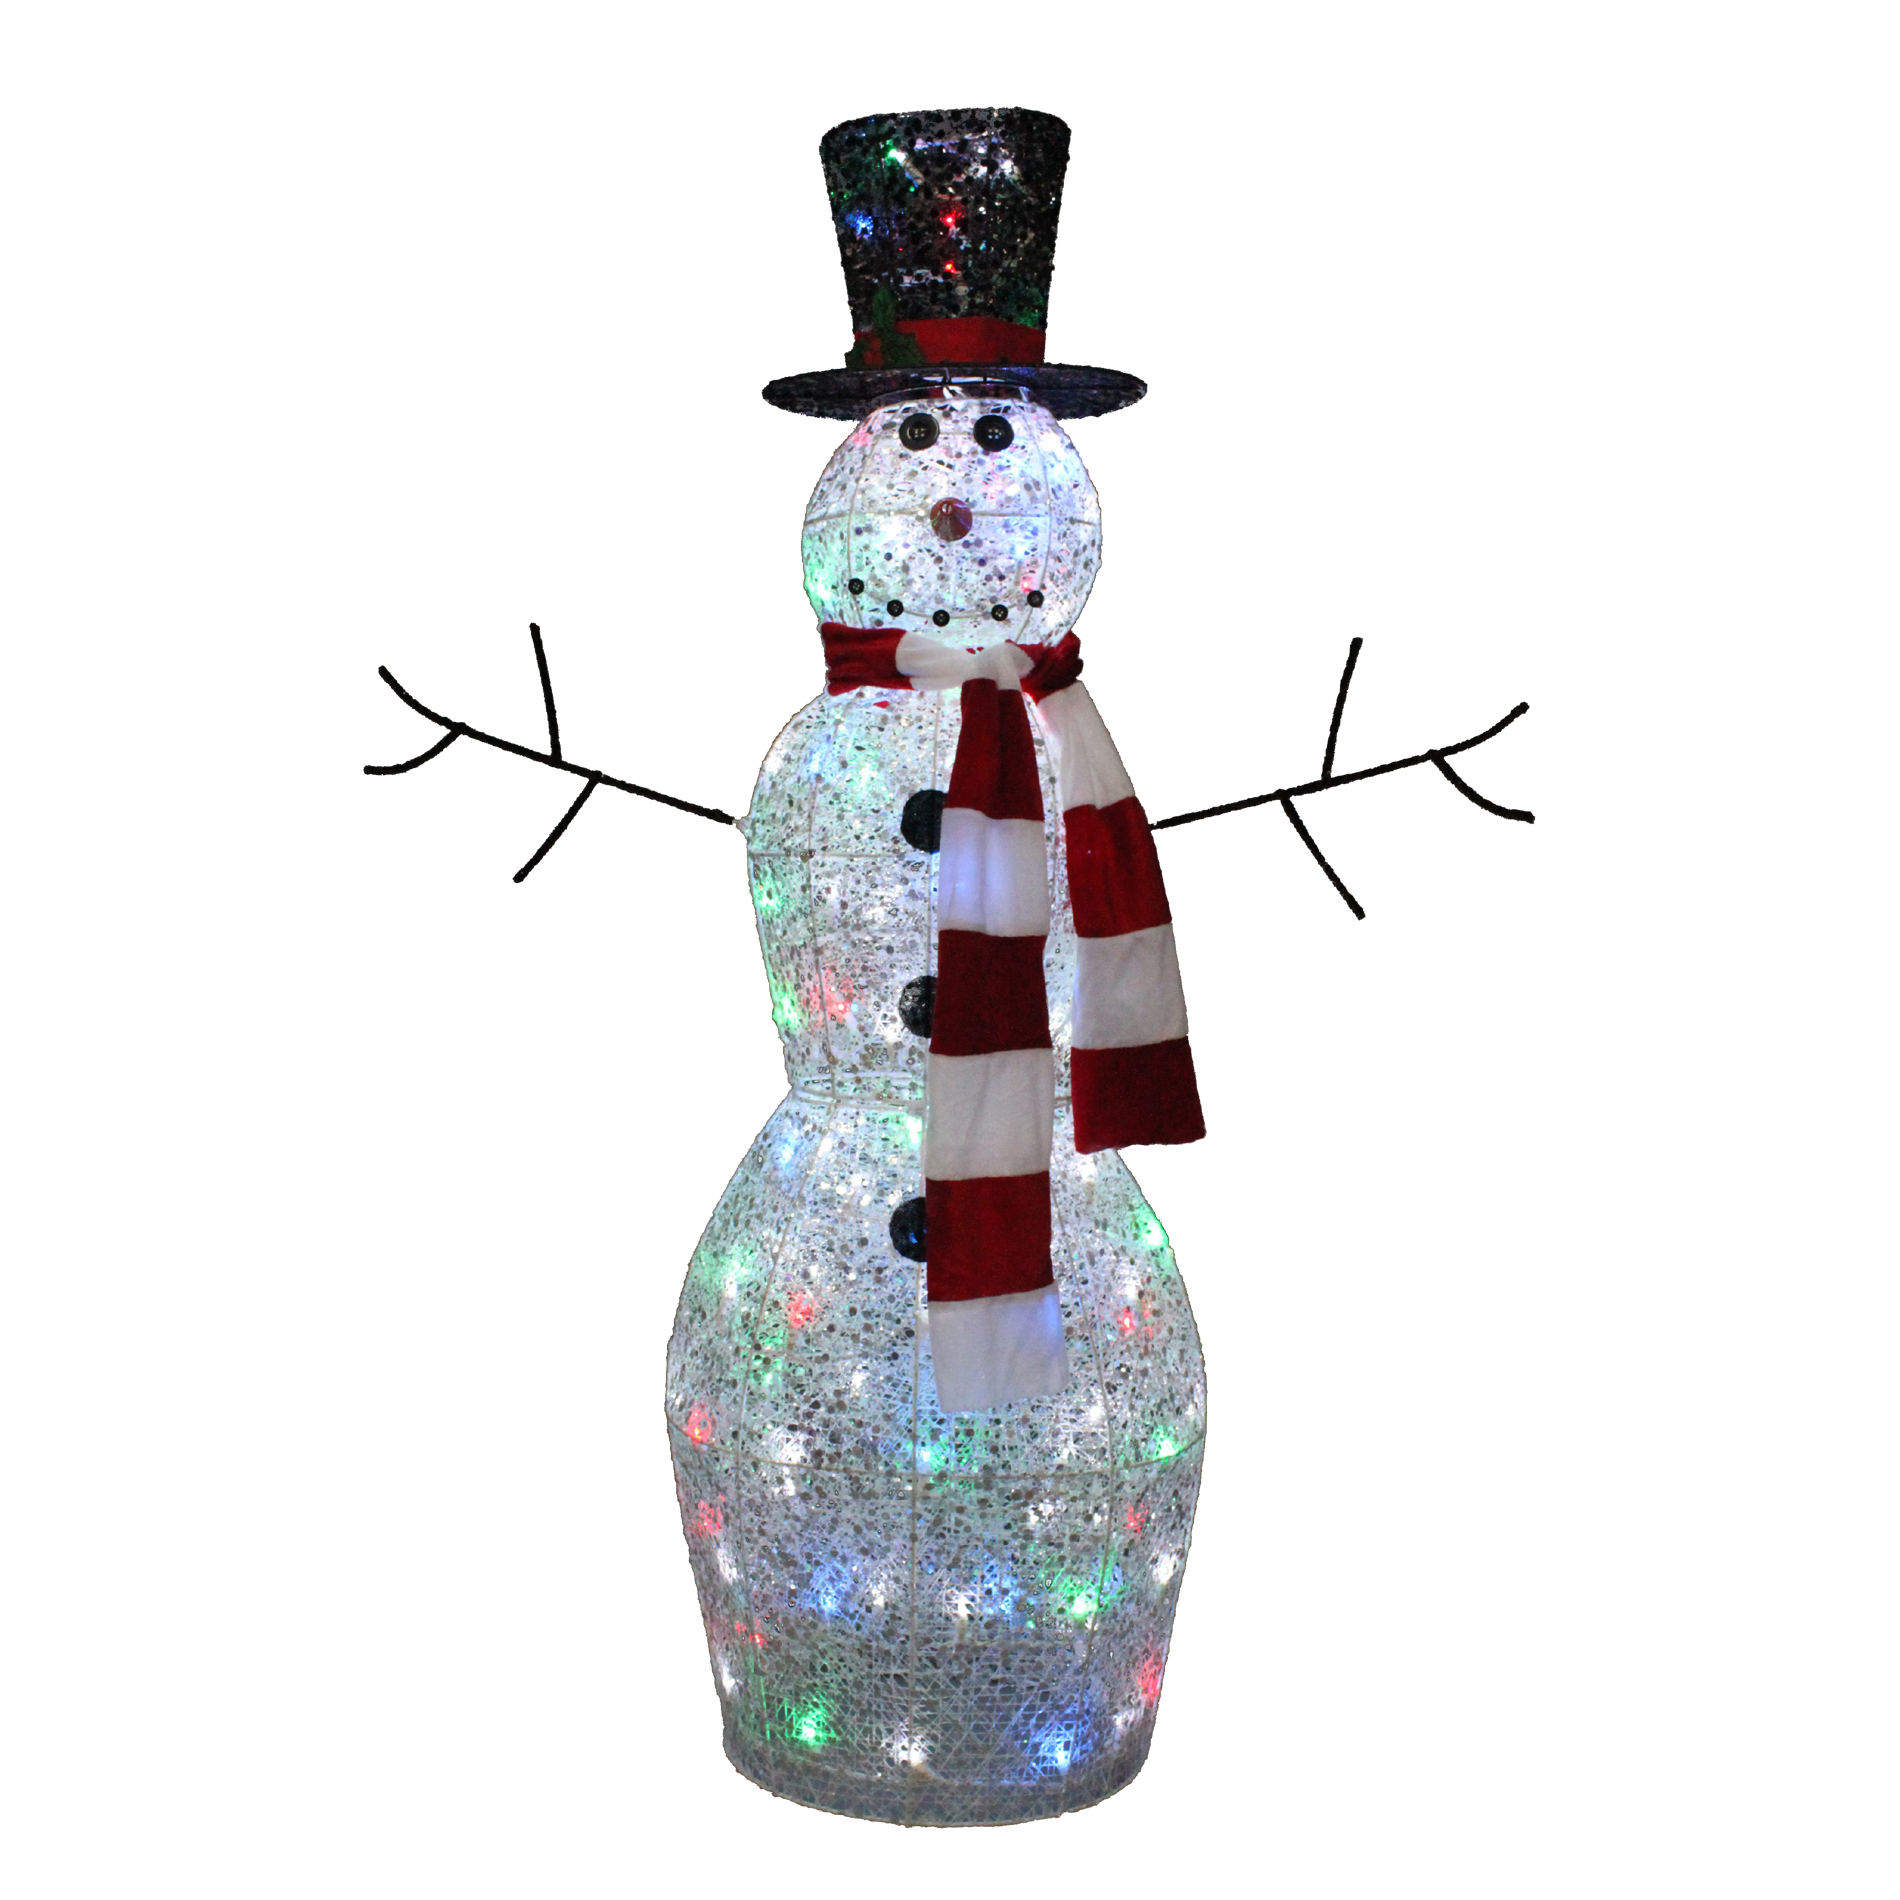 Trimming Traditions 48in Twinkling Snowman with 100 LED Christmas Lights